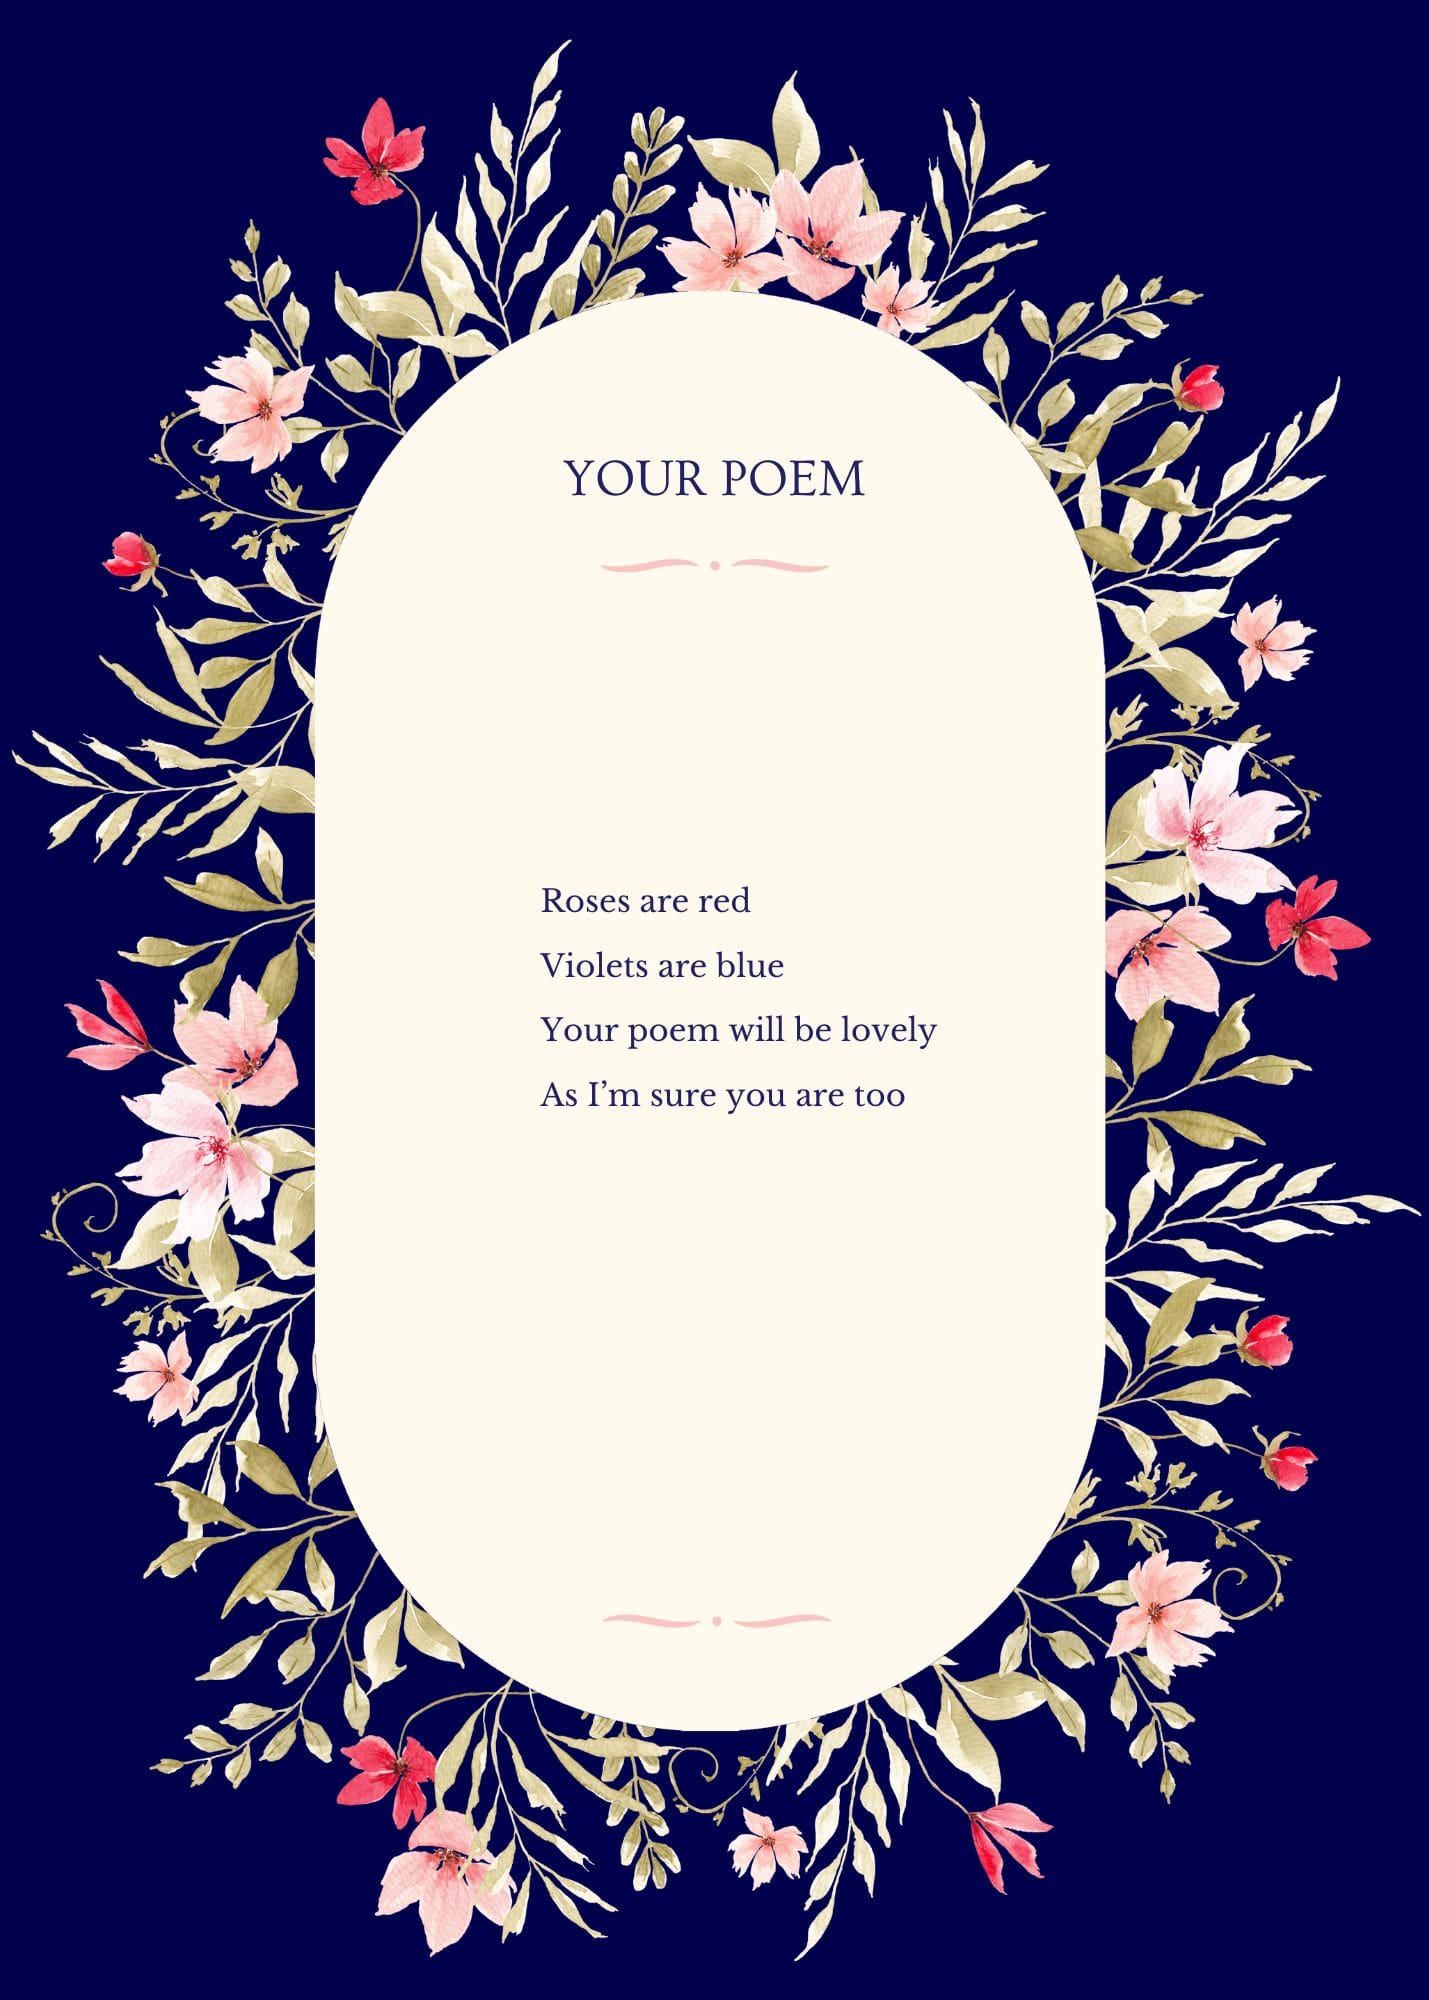 A cream oval on a navy background surrounded by flowers, framing a poem